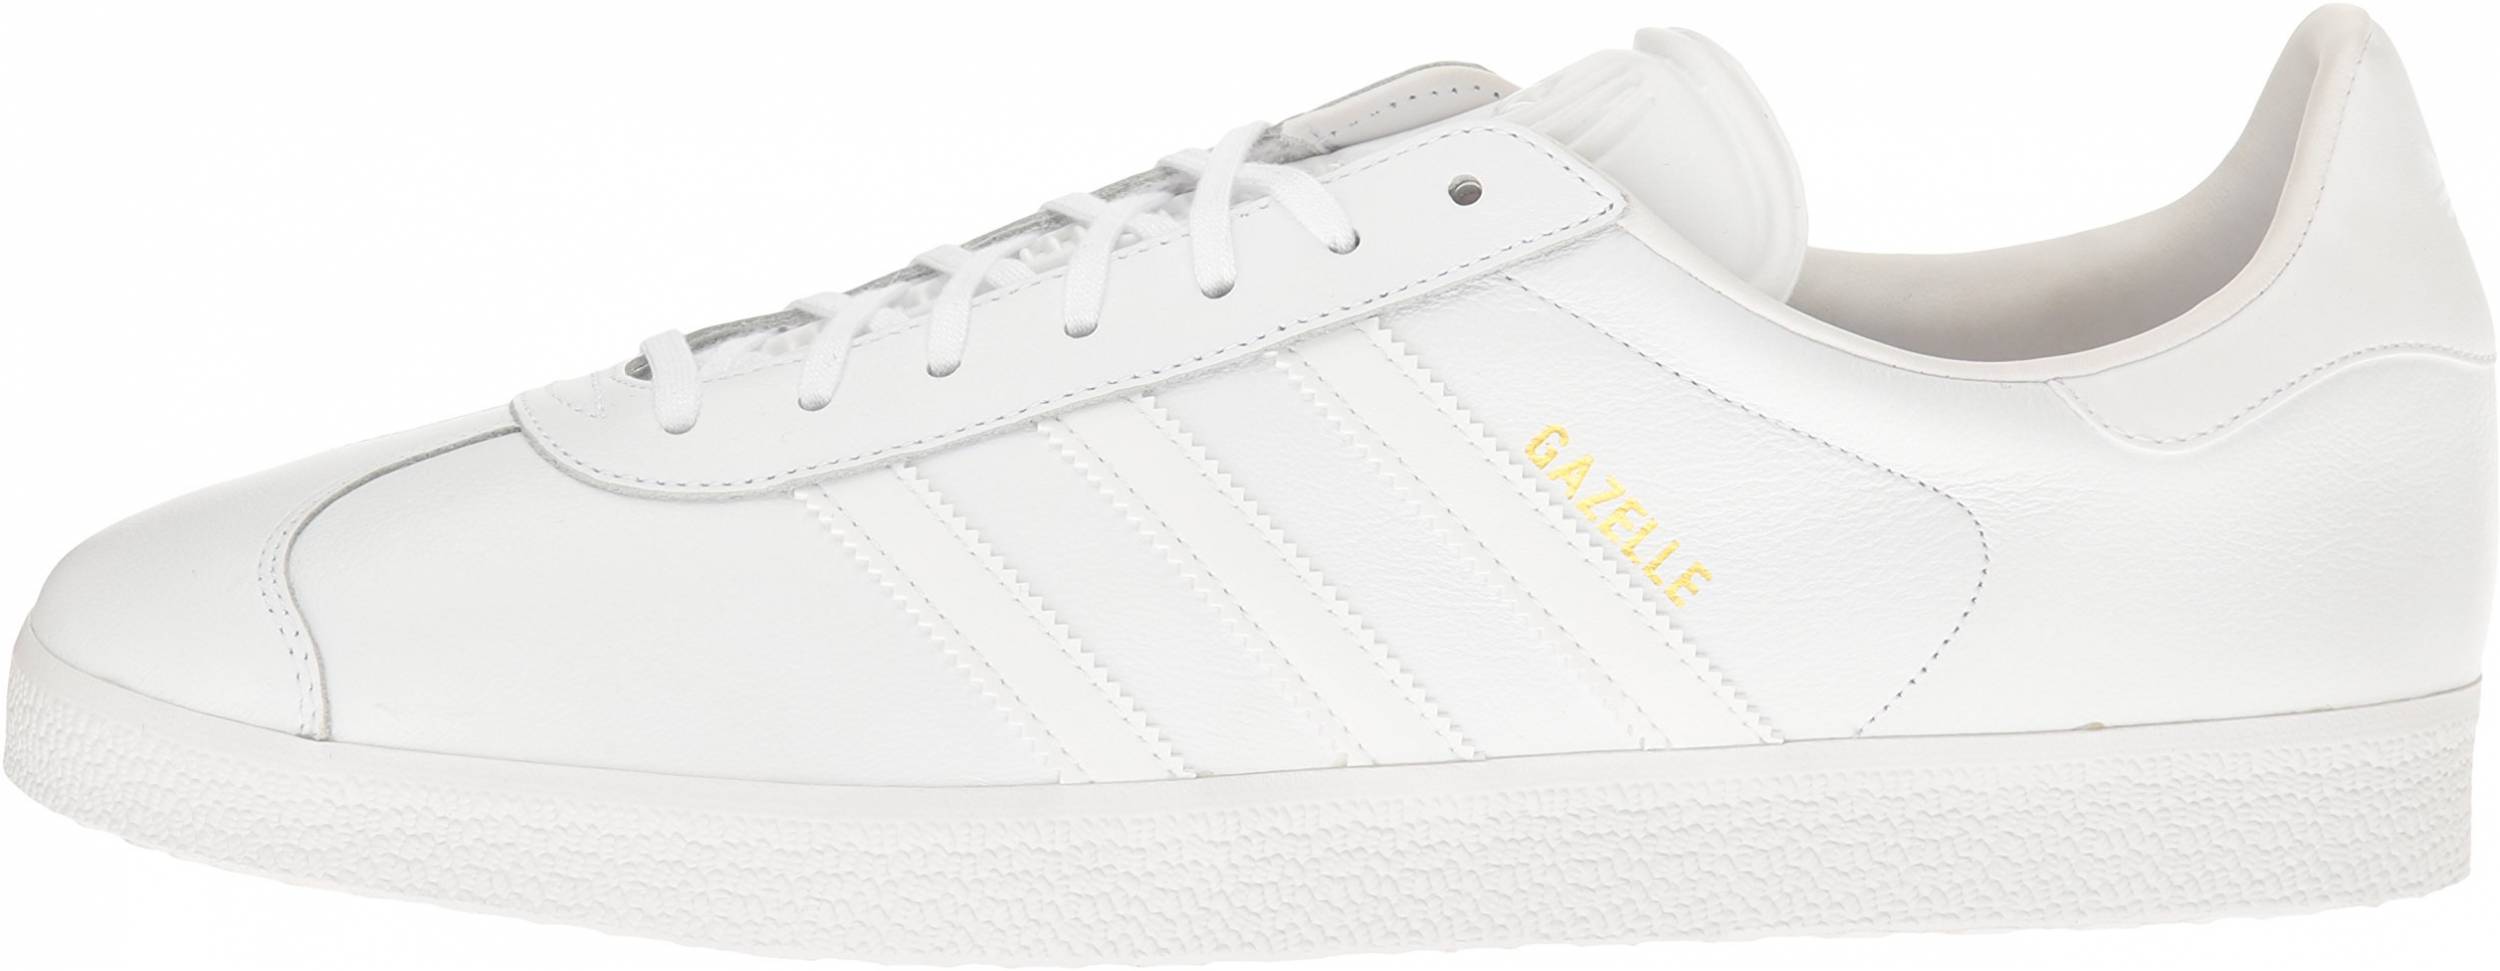 all white leather adidas